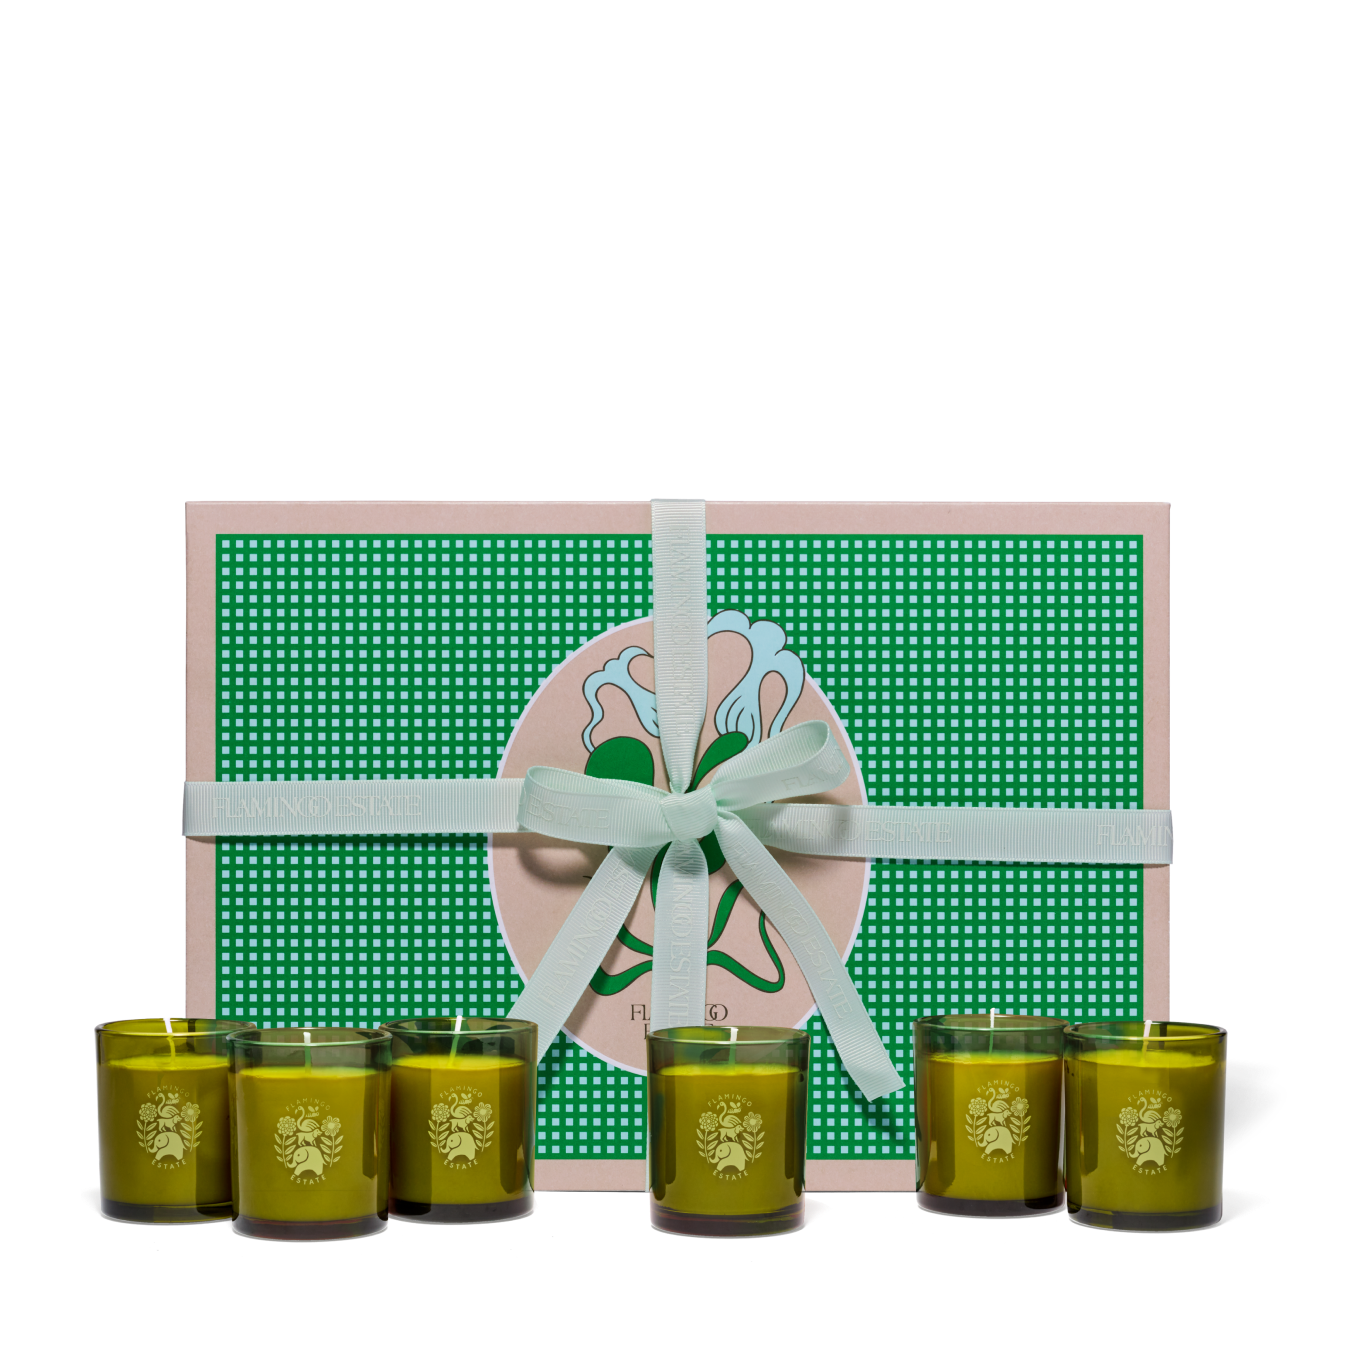 Six Flamingo Estate Garden Essentials Candles And Packaging Displayed In Front Of A Green Gift Set Box